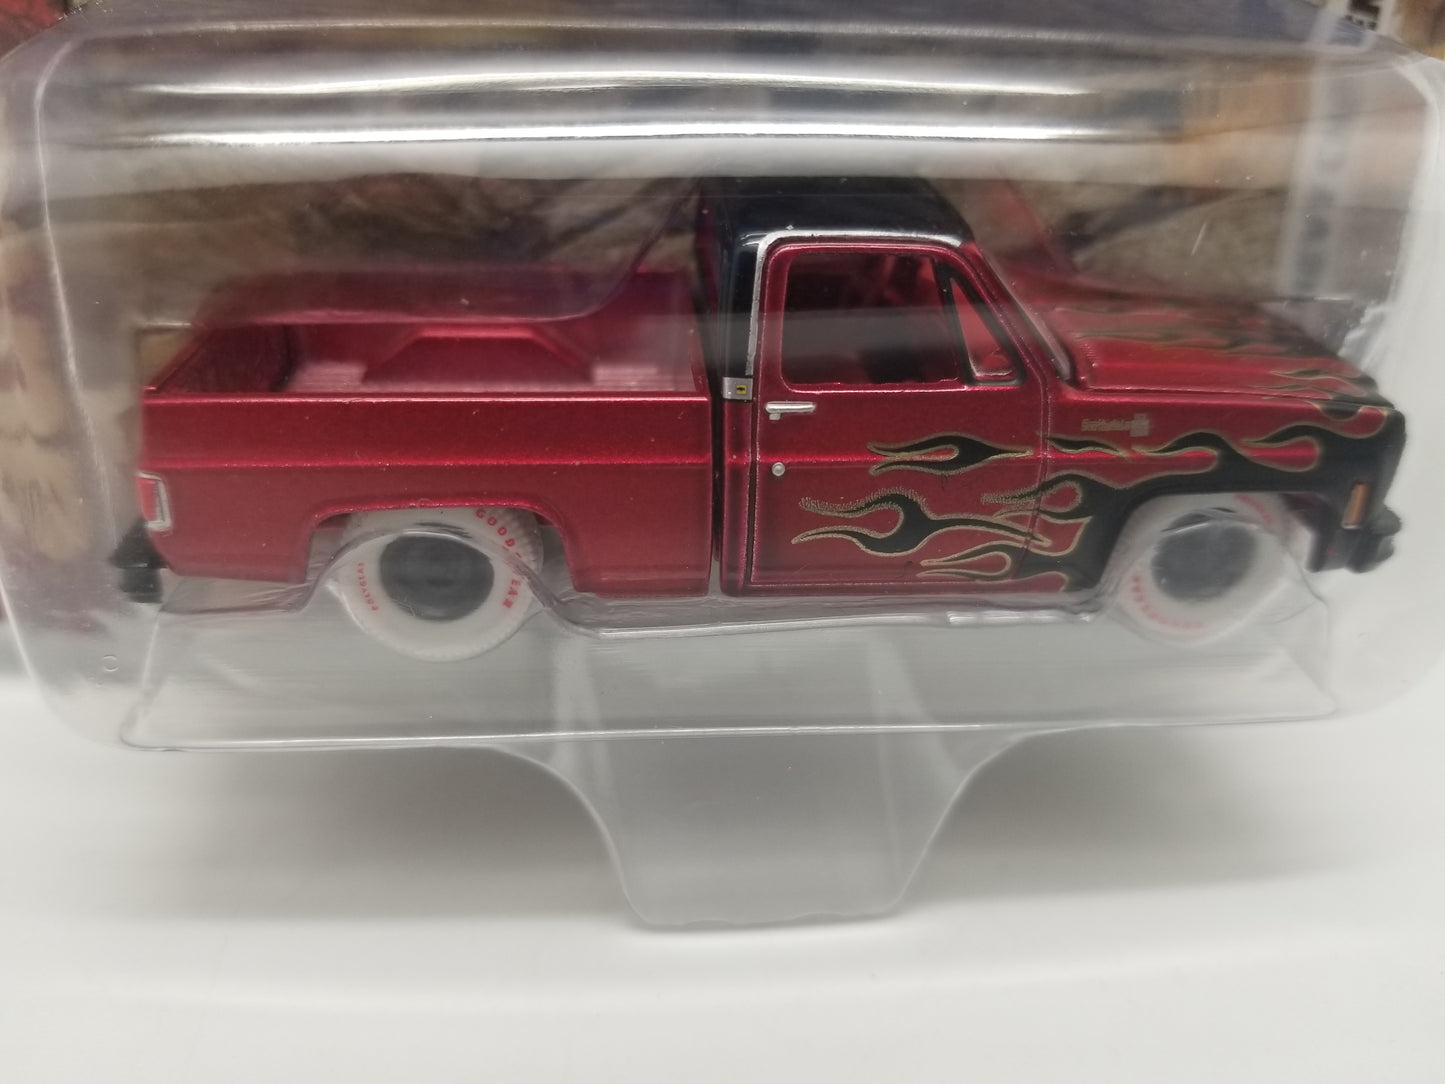 AW CHASE 1976 Chevy Cheyenne - CLEAN VERSION